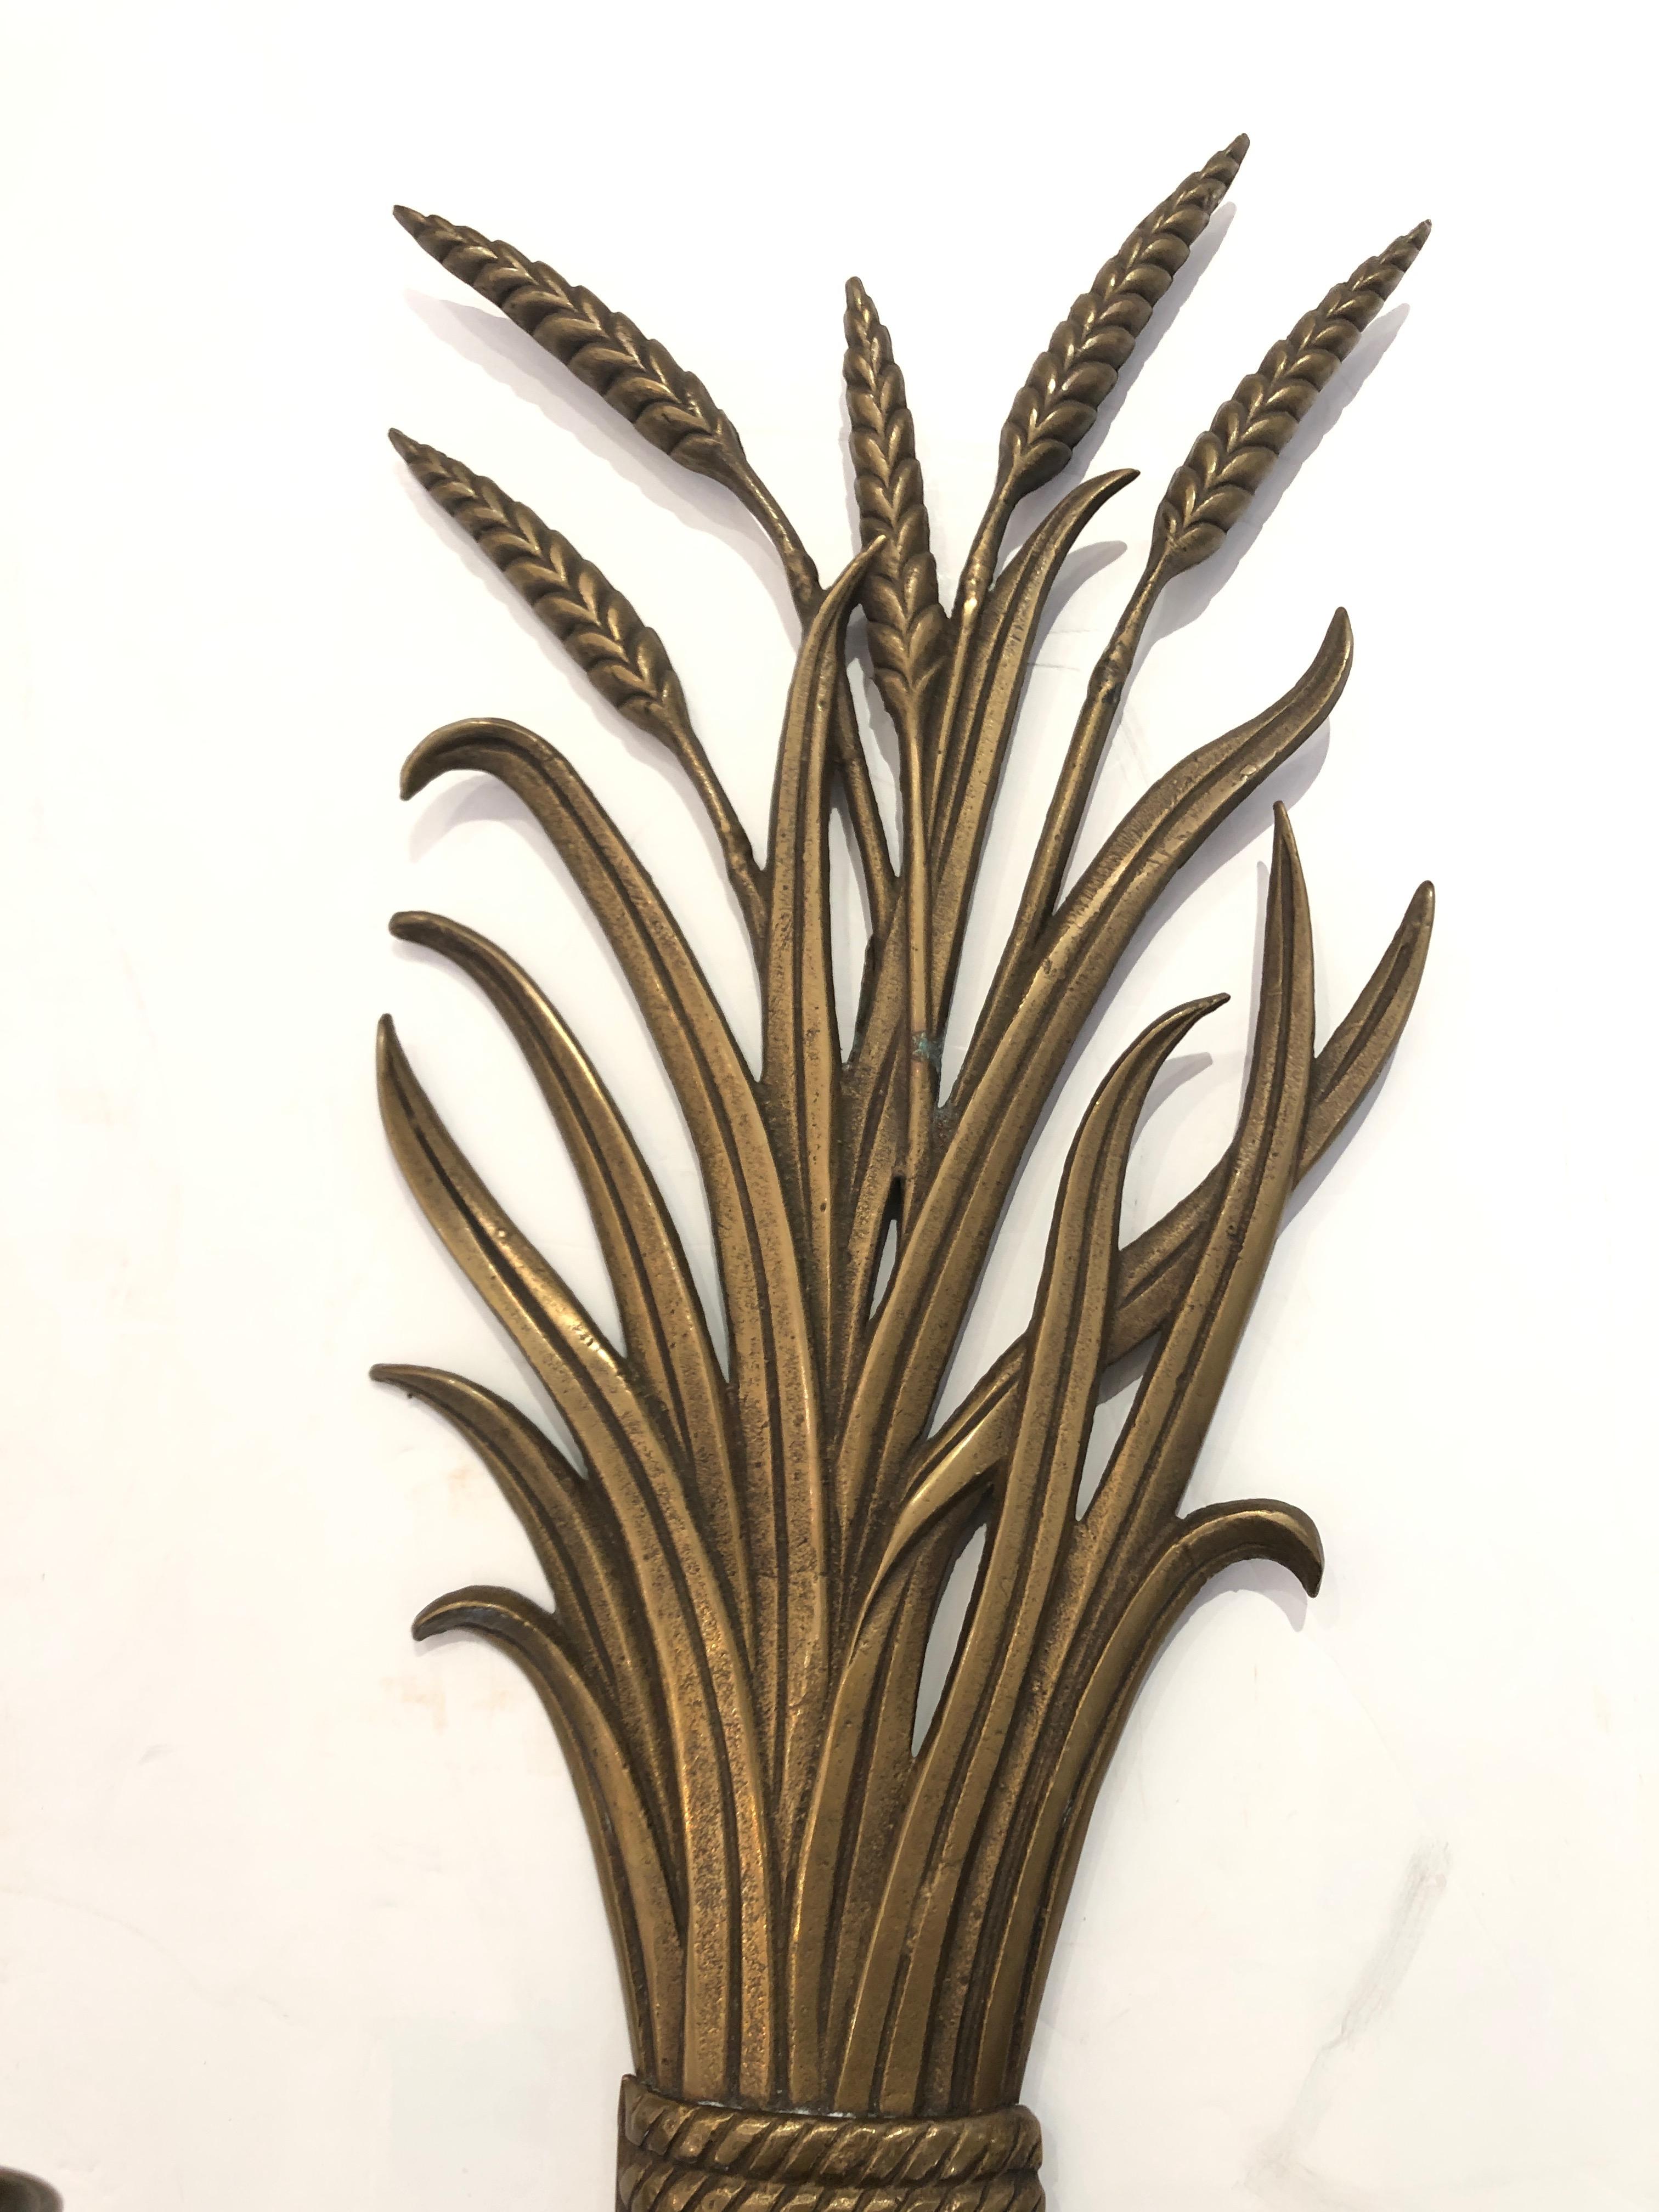 Two handsome brass candle sconces, two arms each, in a classic wheat sheaf motife.